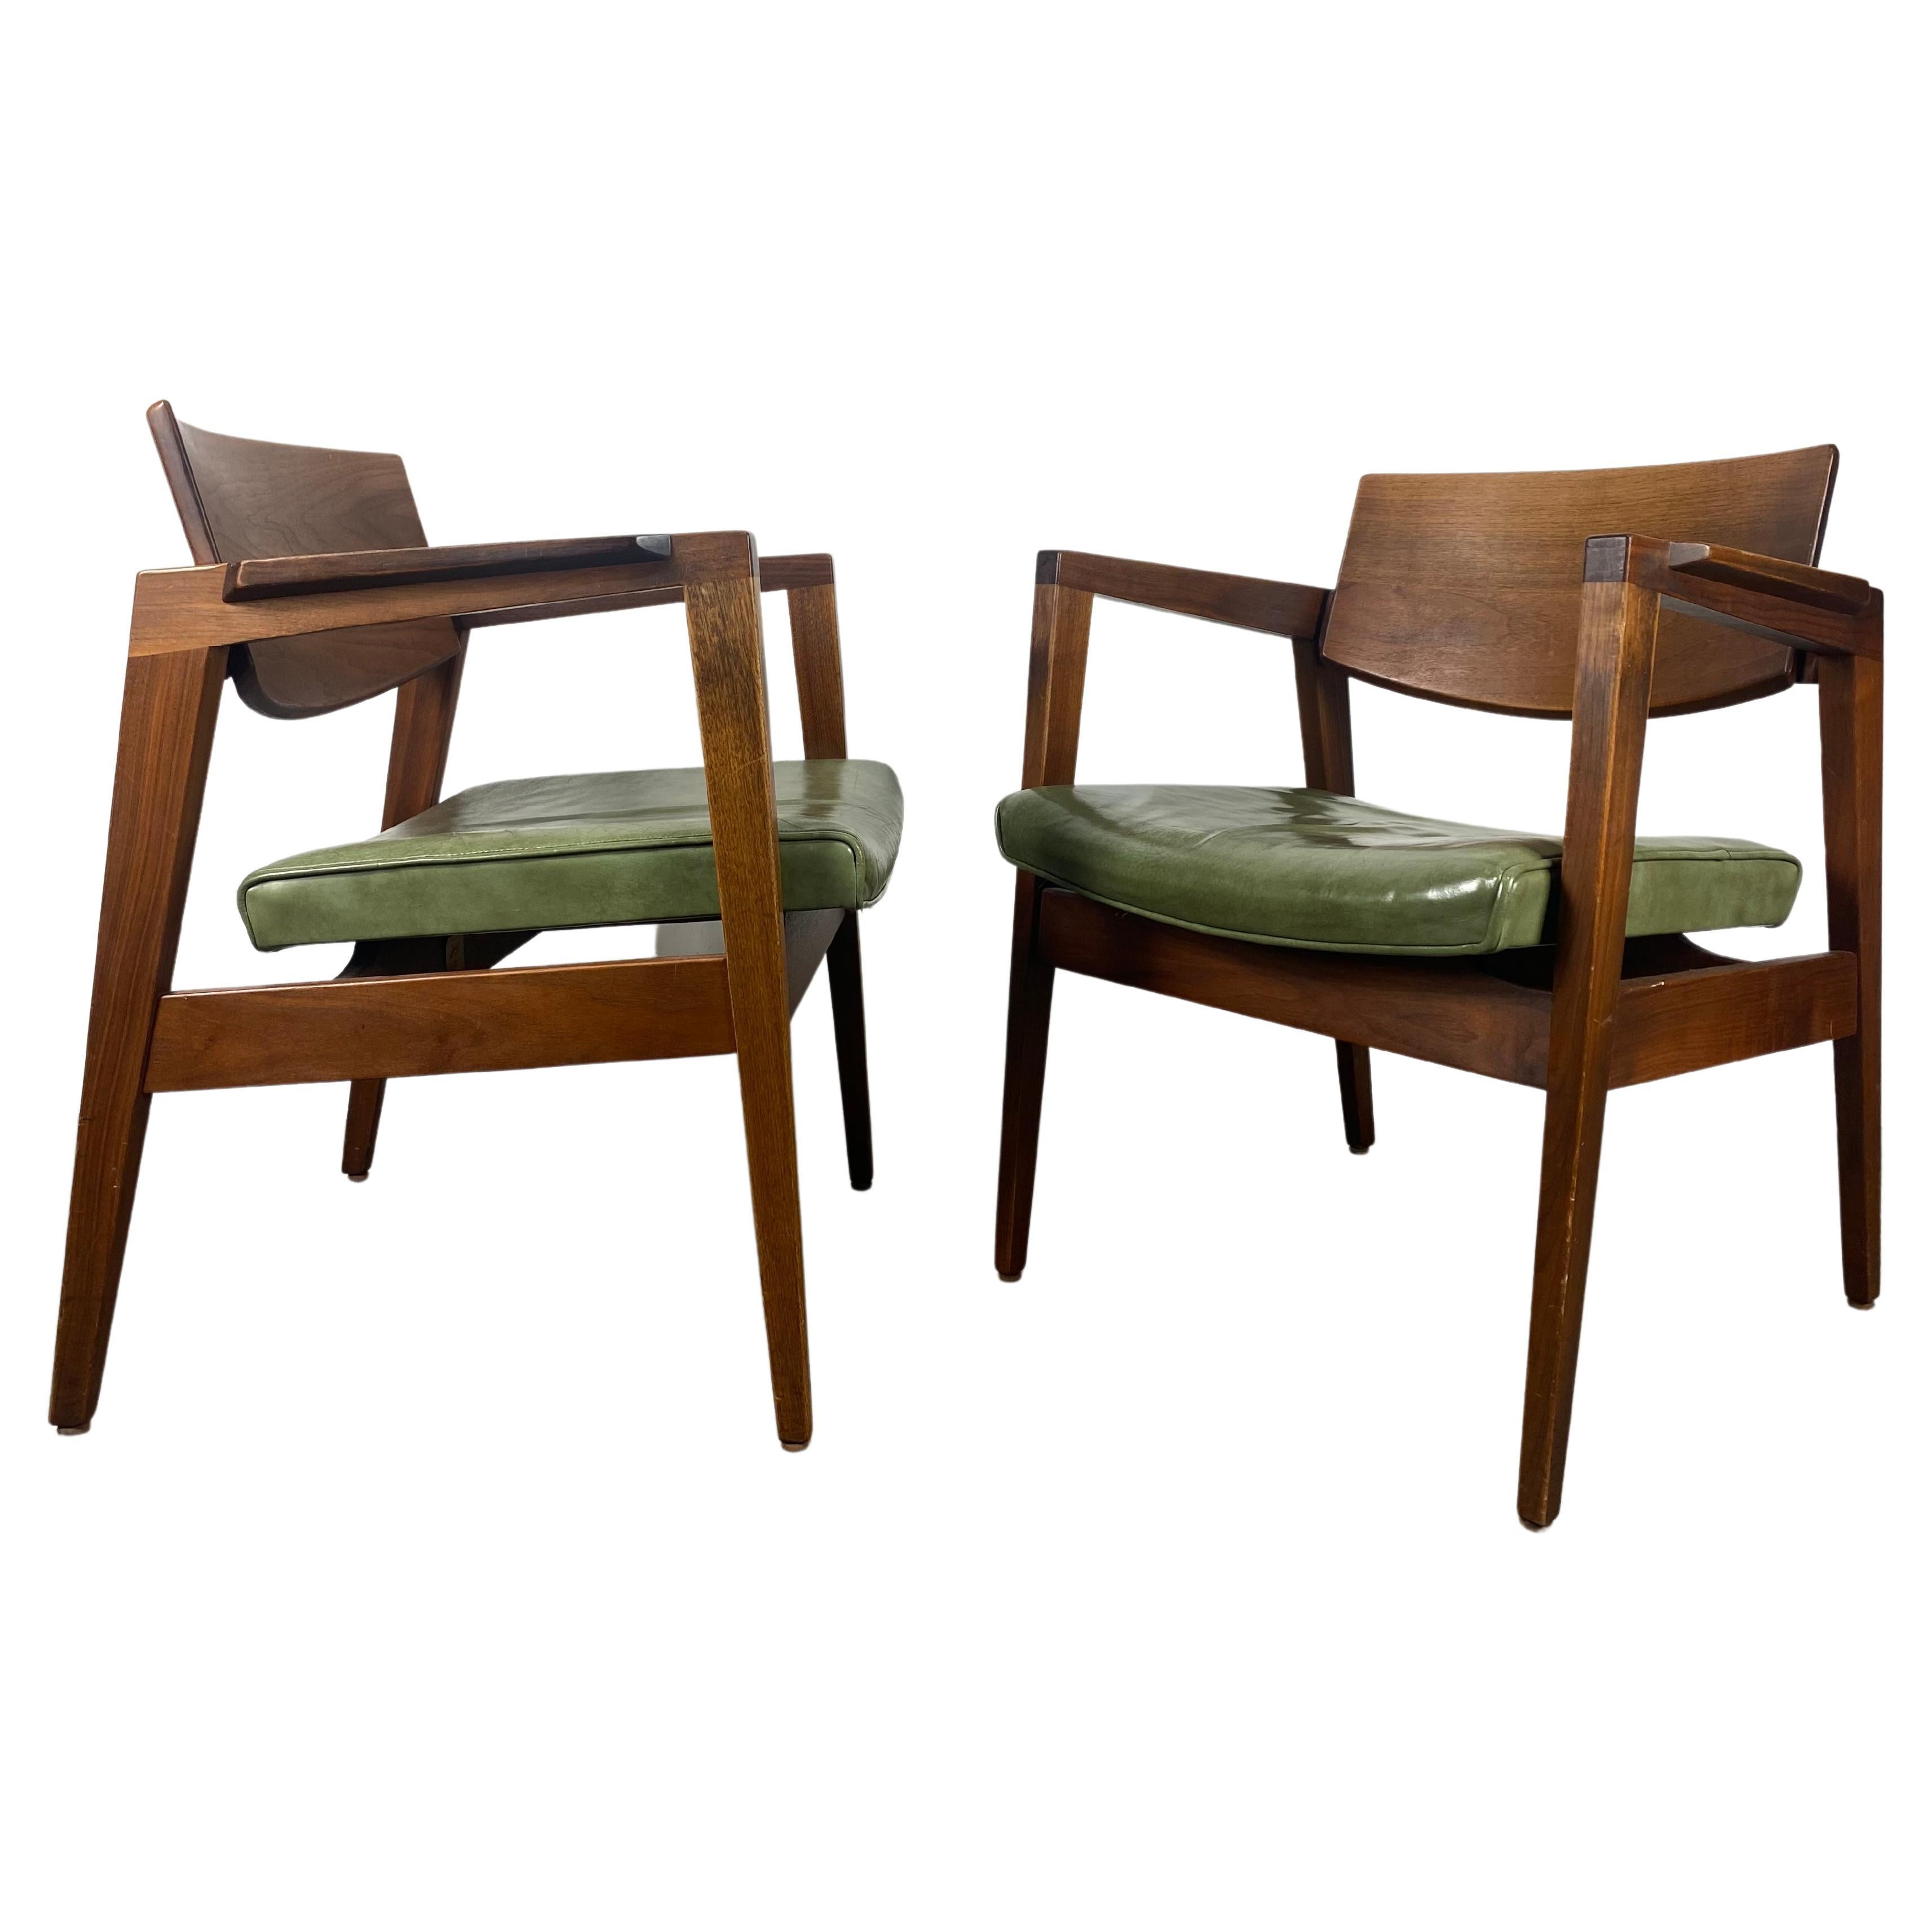 Solid Walnut and Leather Lounge Chairs by Gunlocke, Jens Risom Style